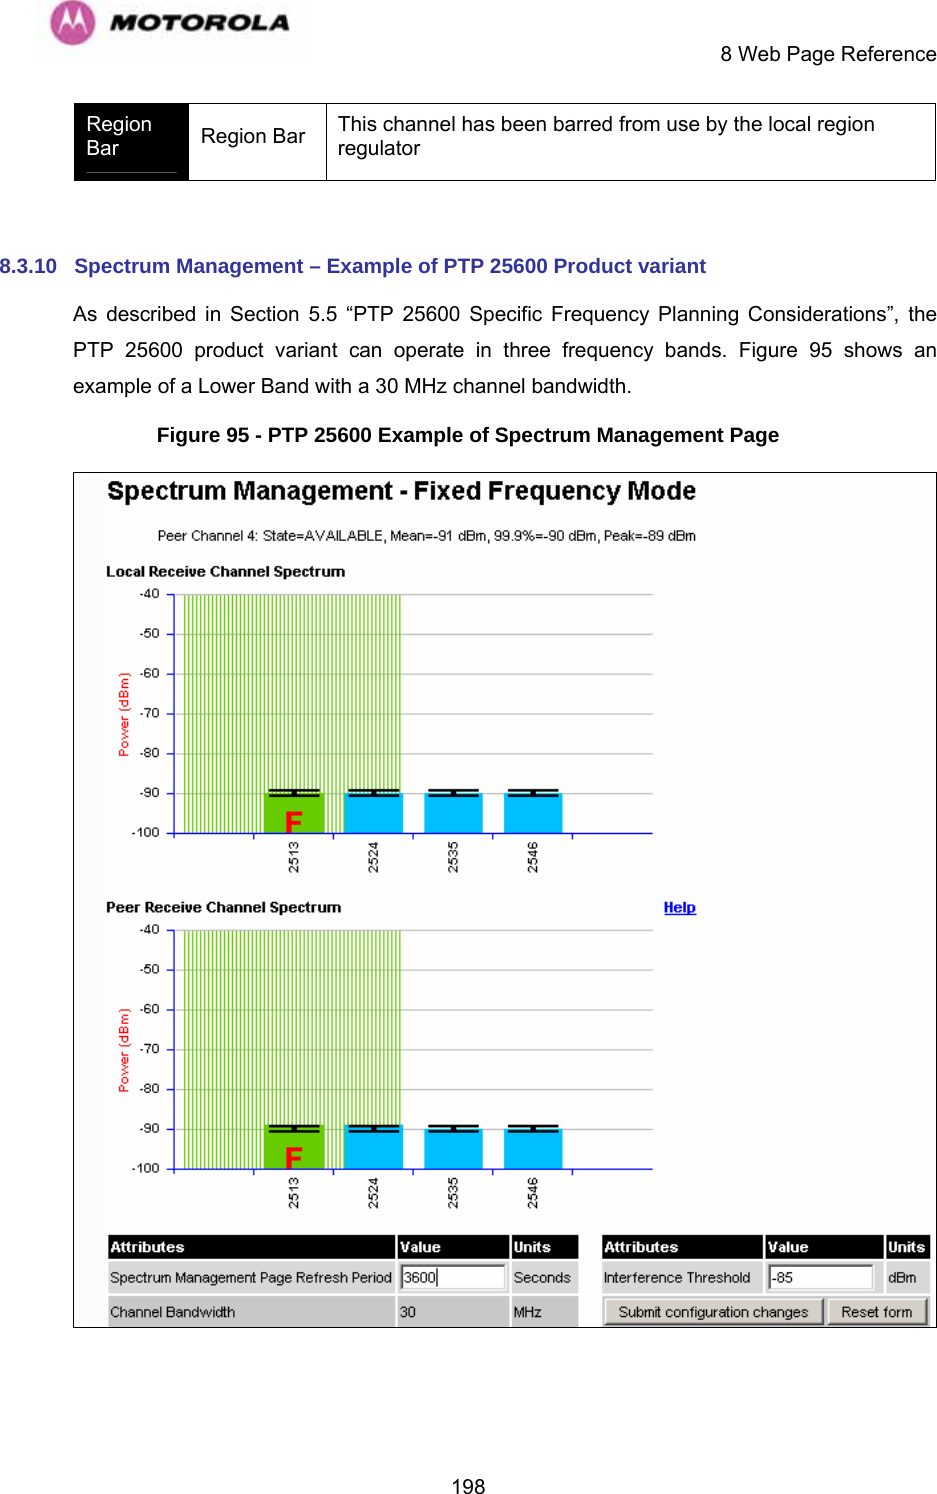     8 Web Page Reference  198Region Bar  Region Bar  This channel has been barred from use by the local region regulator  8.3.10  Spectrum Management – Example of PTP 25600 Product variant As described in Section 5.5 “PTP 25600 Specific Frequency Planning Considerations”, the PTP 25600 product variant can operate in three frequency bands. Figure 95 shows an example of a Lower Band with a 30 MHz channel bandwidth. Figure 95 - PTP 25600 Example of Spectrum Management Page   